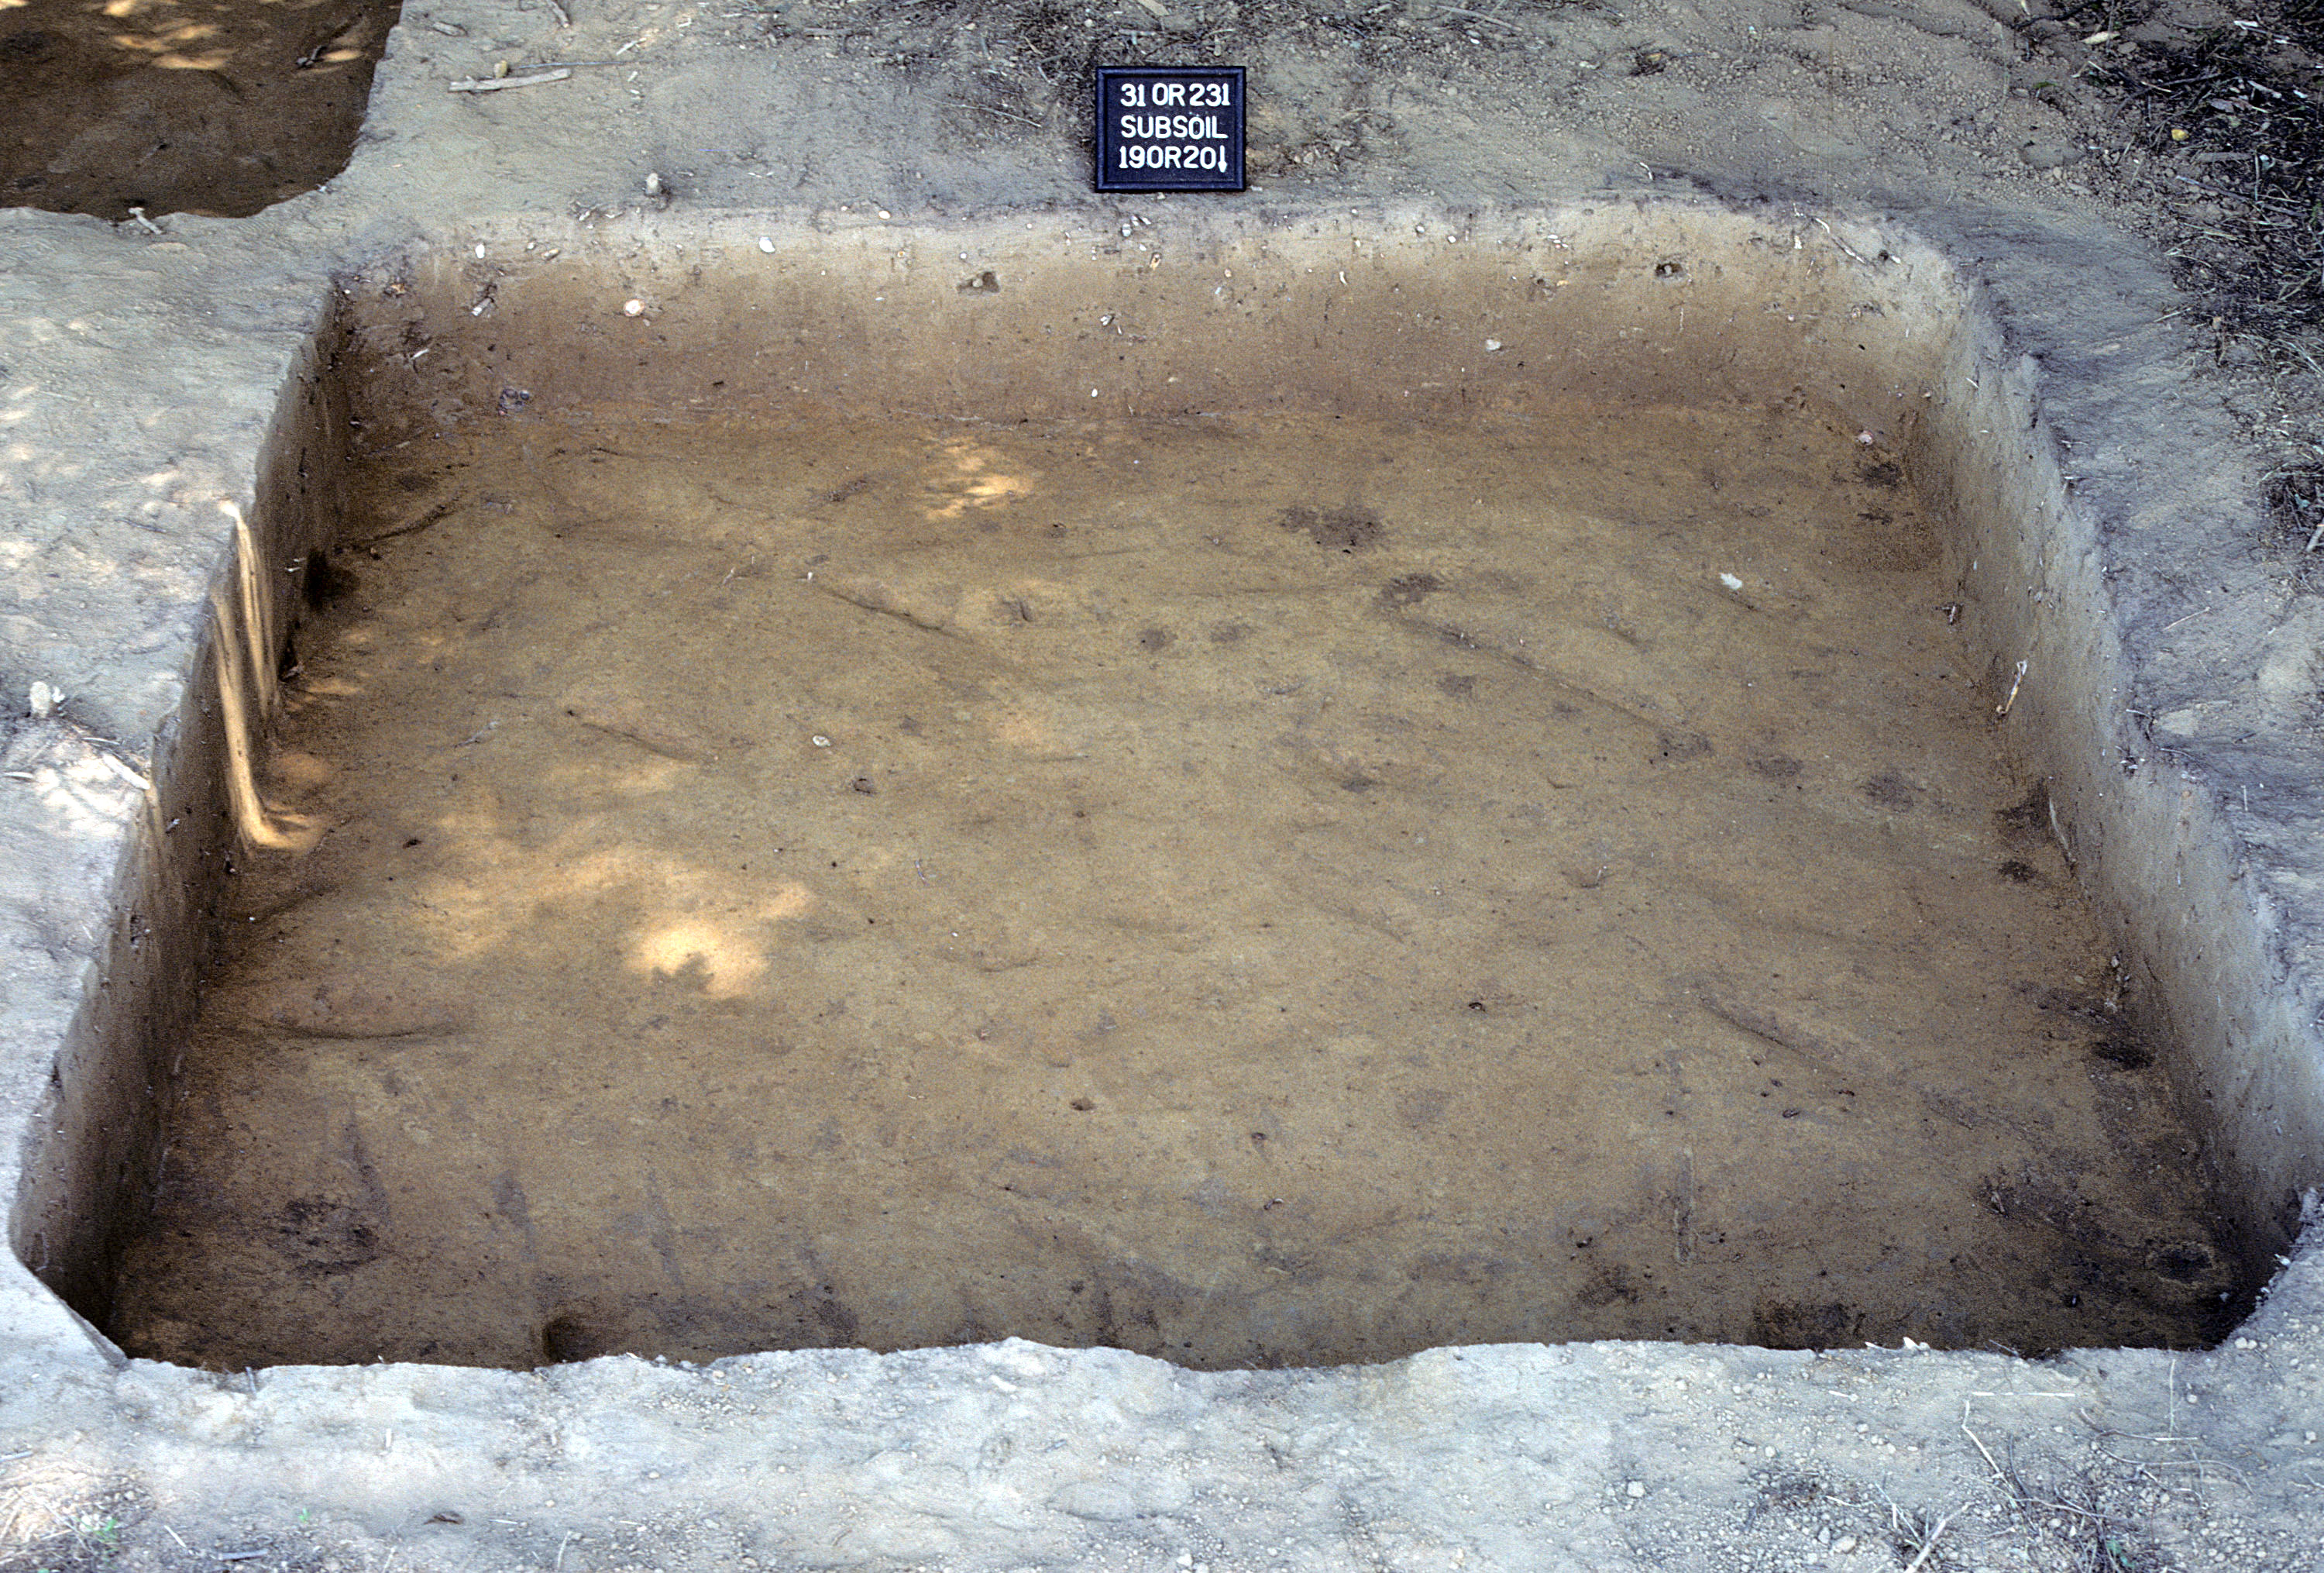 Figure 728. Sq. 190R20 at top of subsoil (view to south).